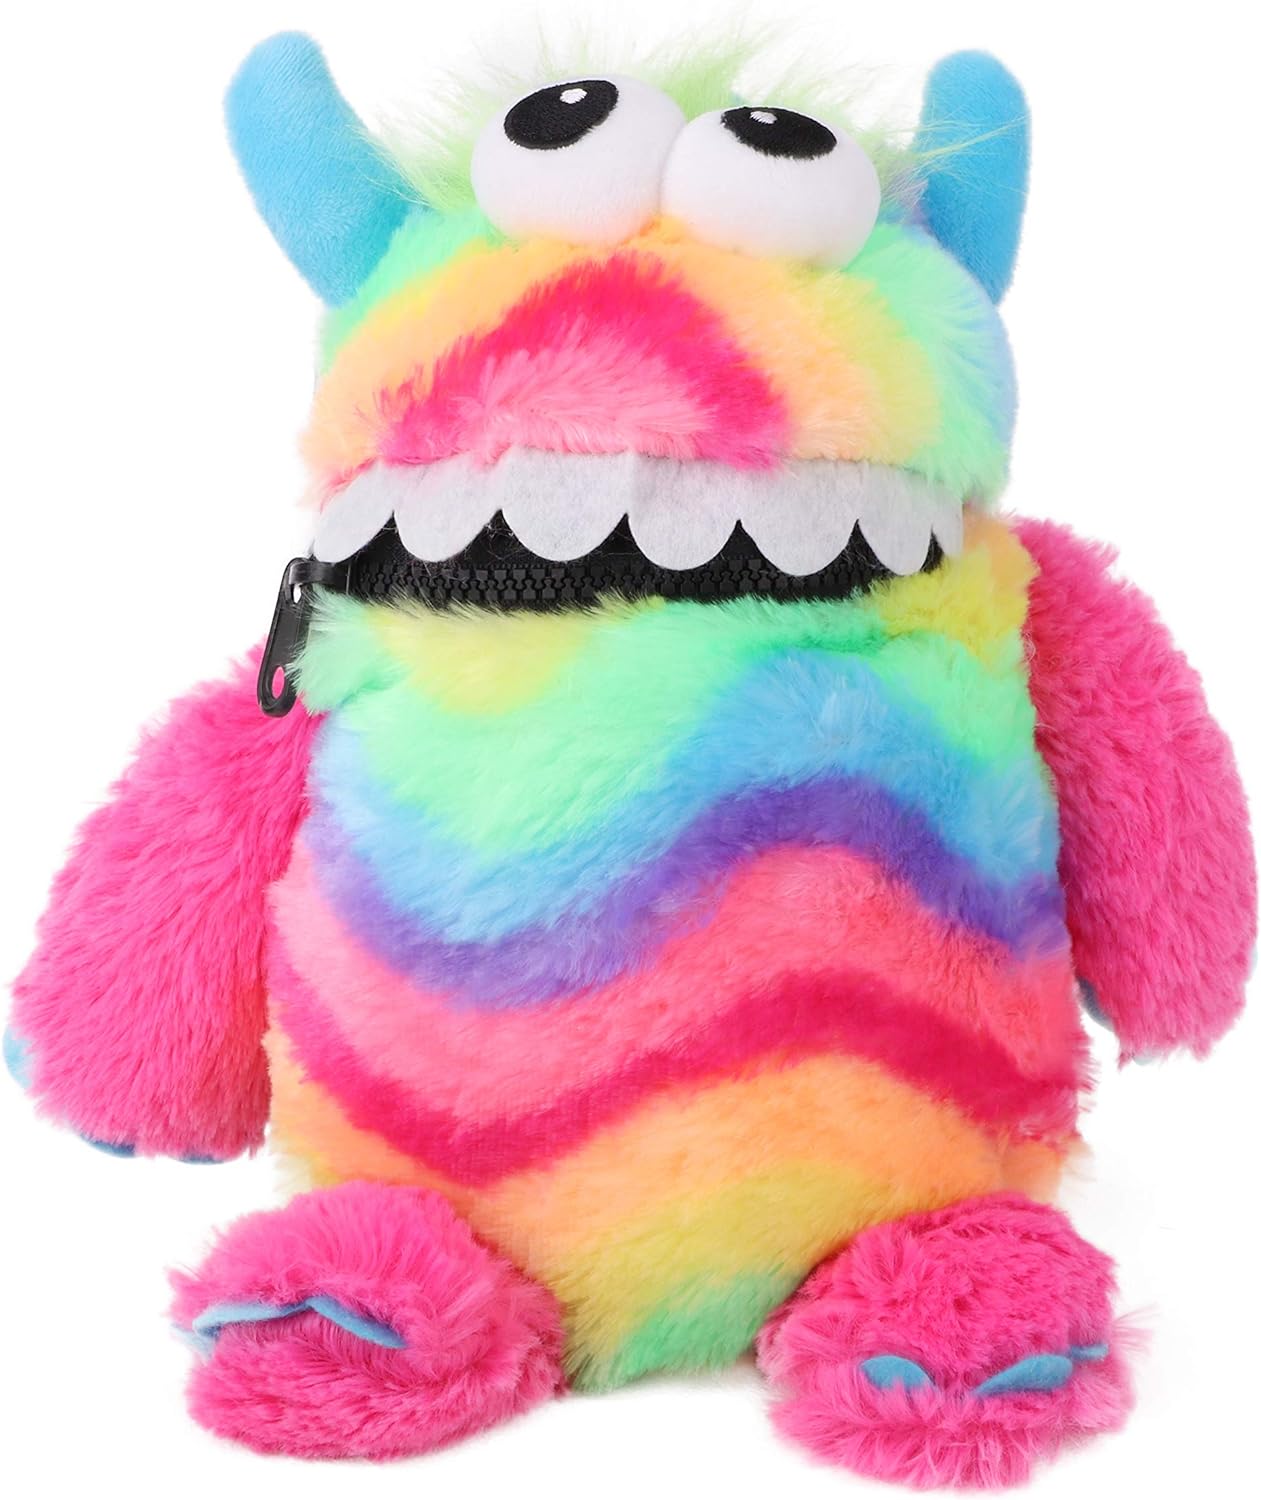 Worry Monster Soft Plush Toy Pink and Green Childrens Write Down Your Worries Cuddly Toy Gosh!